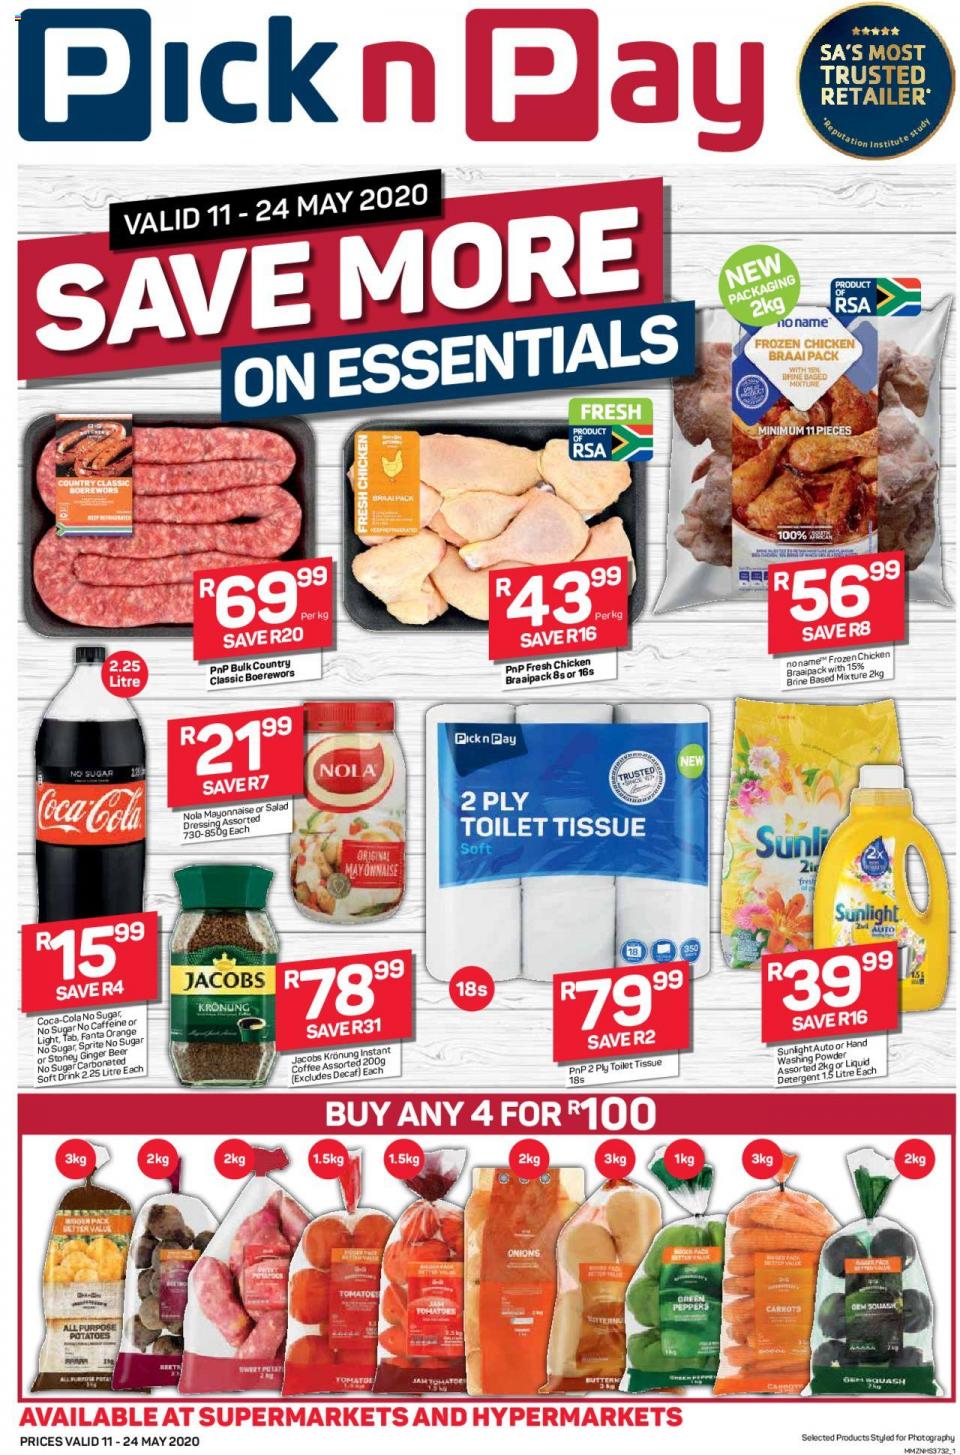 Pick n Pay Specials Save More On Essentials 11 May 2020